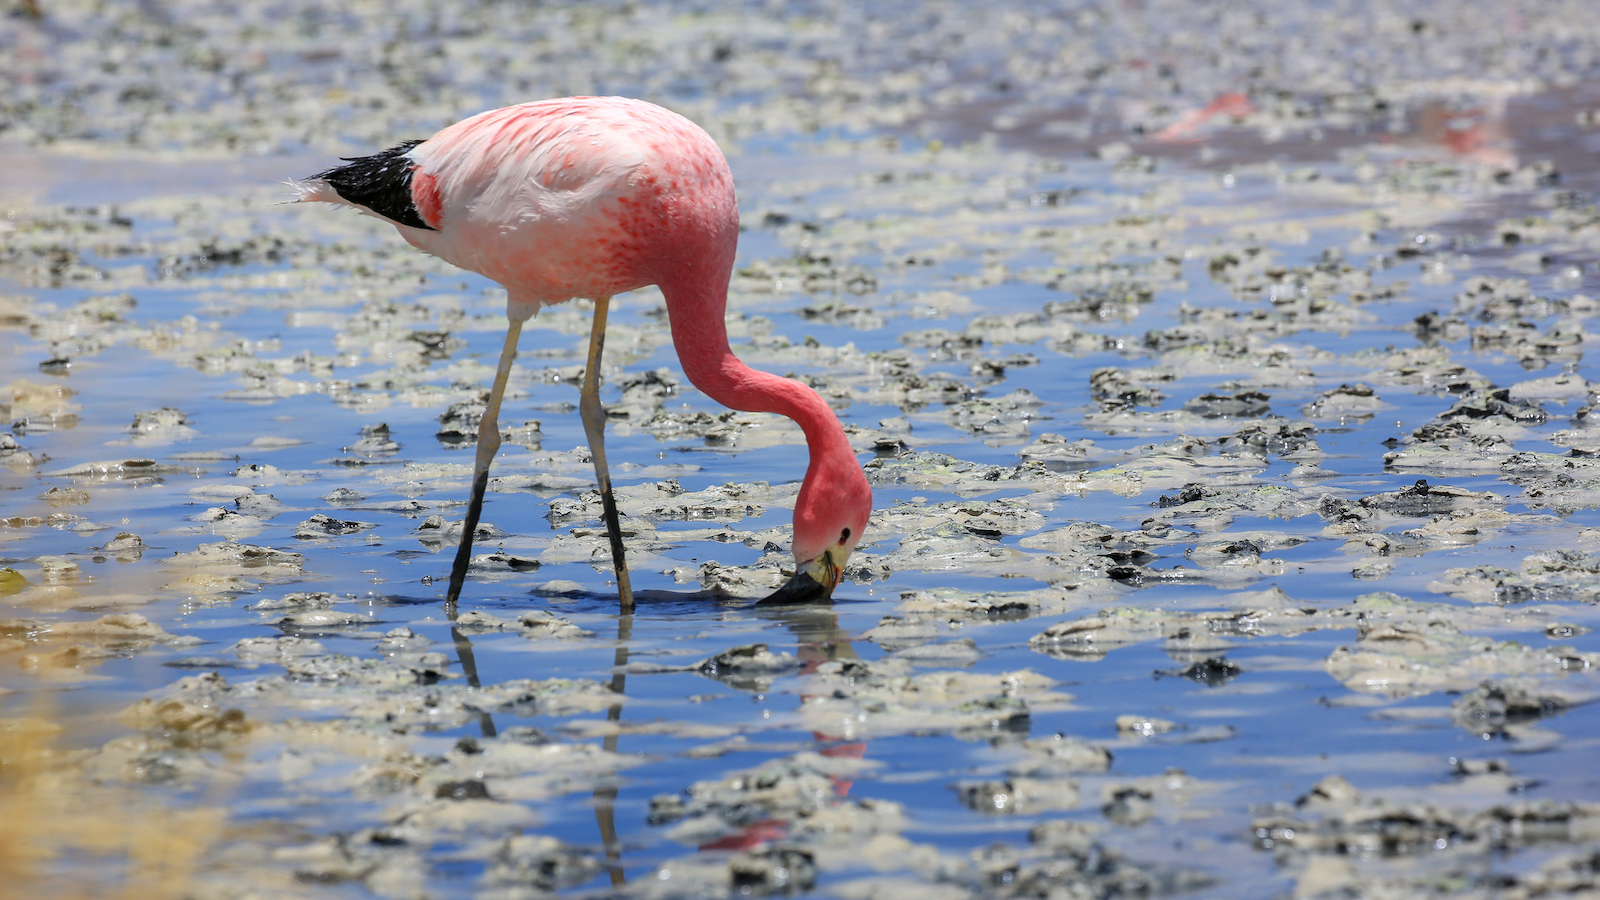 Pink, white and black colored Andean flamingo feeding in a lake, with other flamingos reflected in the water